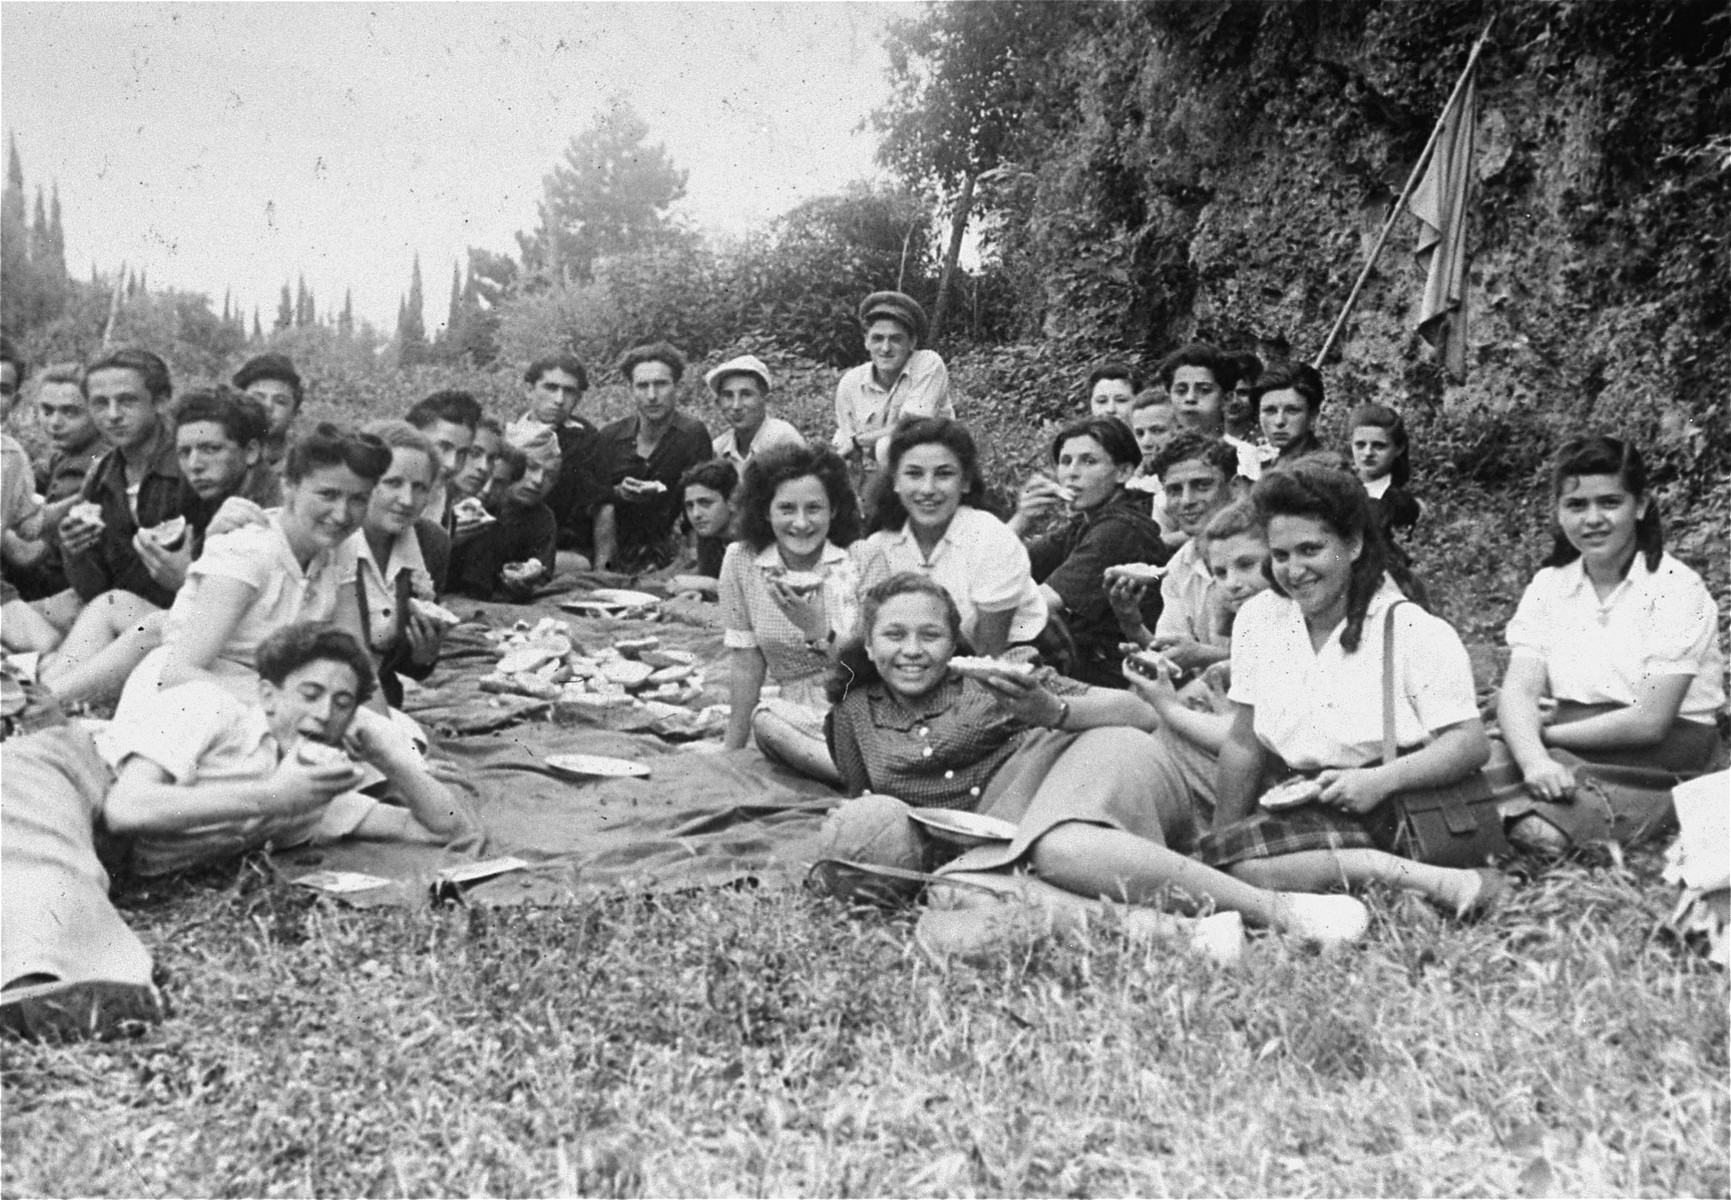 A group of young DPs from Cremona on an UNRRA-sponsored trip to Selvino, Italy, in the Italian Alps.

Among those pictured is Ernest Schnittlinger (far left, in the back).